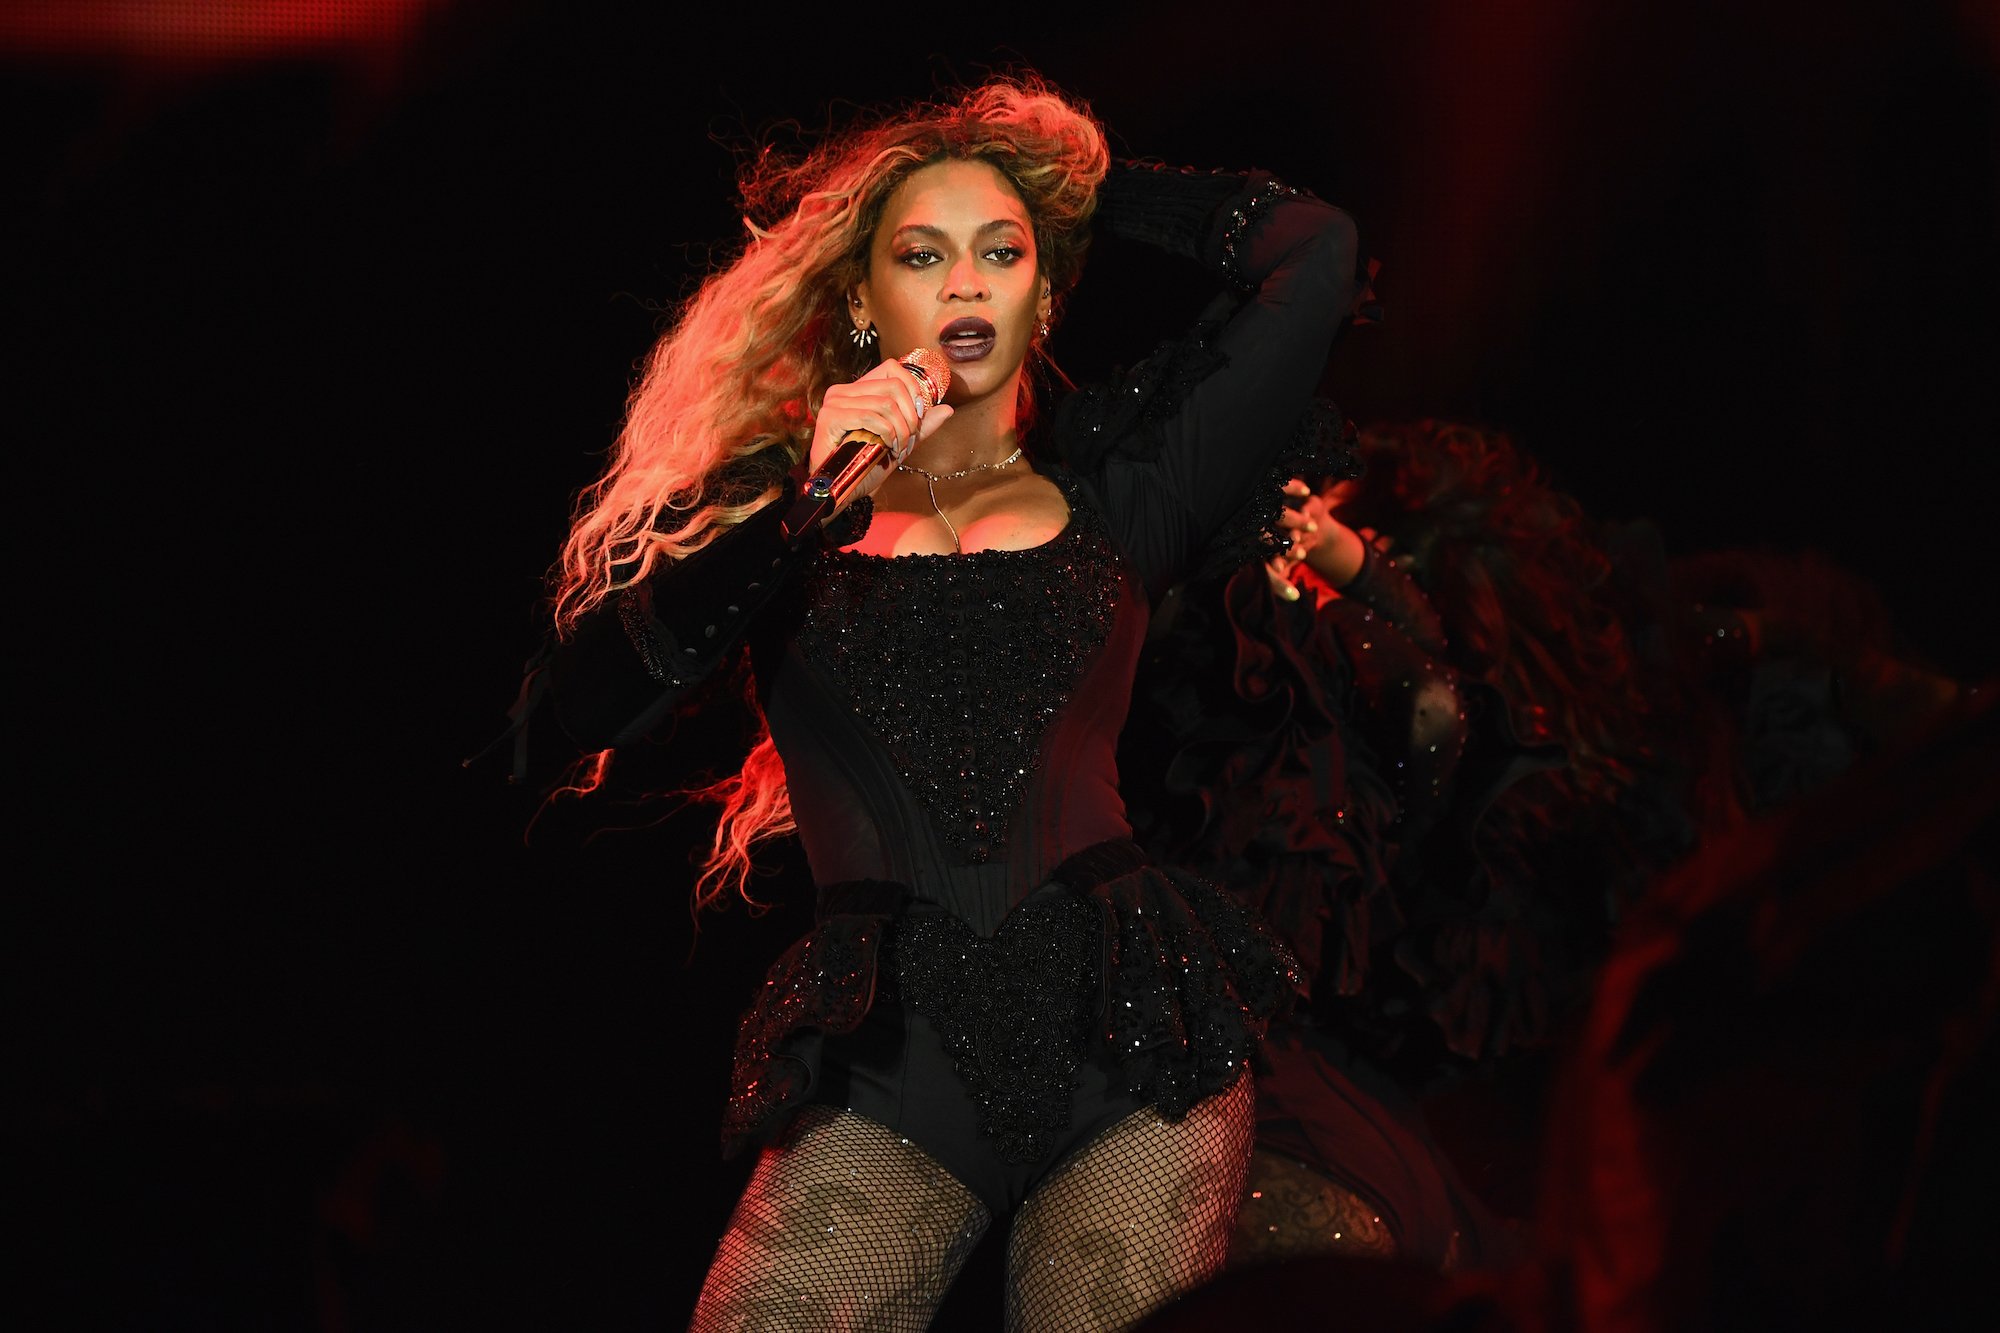 Beyoncé performing onstage, holding a microphone in one hand and adjusting her hair with the other